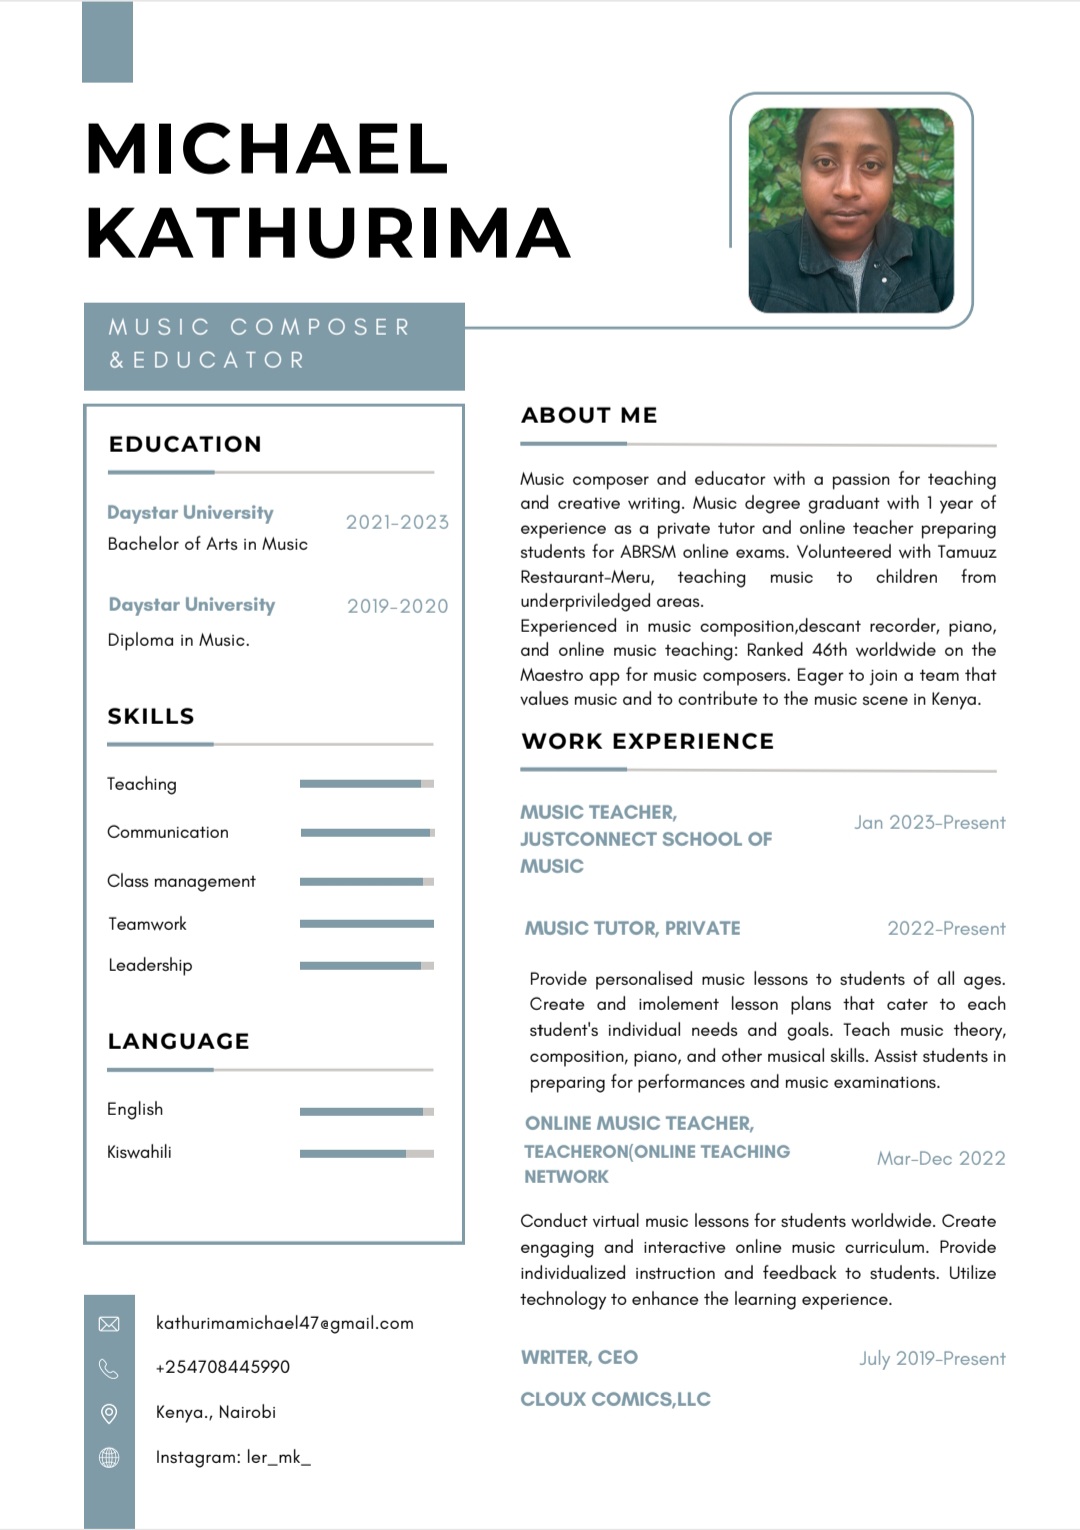 MICHAEL
KATHURIMA

MUSIC COMPOSER
&EDUCATOR

ABOUT ME
EDUCATION

 

Music composer and educator with a passion for teaching
Daystar University ond creative writing. Music degree greduont with | yeor of
experience as a private tutor and online teacher preparing
students for ABRSM online exams. Volunteered with Tomuuz
Restouront-Meru, teaching music to children from
Daystar University 20 underpriviledged creas
Experienced in music composition descant recorder, piano,
ond online music teaching: Ronked 46th worldwide on the
Moestro app for music composers. Eager to join o team that
values music and to contribute to the music scene in Kenya.

WORK EXPERIENCE

Bachelor of Arts in Music

Diploma in Music

SKILLS

Teaching
MUSIC TEACHER,

 

js ot
Communication JUSTCONNECT SCHOOL OF te
music
Class management
Teamwork MUSIC TUTOR, PRIVATE 2022-Present

Leadership
Provide personalised music lessons to students of oll ages

Create ond imolement lesson plans that cater to ecch
tudent's individual needs ond gocls. Tecch music theory,
LANGUAGE “
composition, piano, and other musical skills Assist students in
preparing for performances and music examinations.

English
ONLINE MUSIC TEACHER,

Kiswahili TEACHERON(ONLINE TEACHING M
NETWORK

 

Conduct virtual music lessons for students worldwide. Create

 

engaging and interactive online music curriculum. Provide
individuclized instruction and feedbock to students. Utilize
technology to enhance the learning experience.
kothurimamichoeld7agmail com

254708445990 WRITER, CEO July 20%9-Present

Kenya, Nairobi CLOUX COMICS LLC

Instagram: lar_mk_